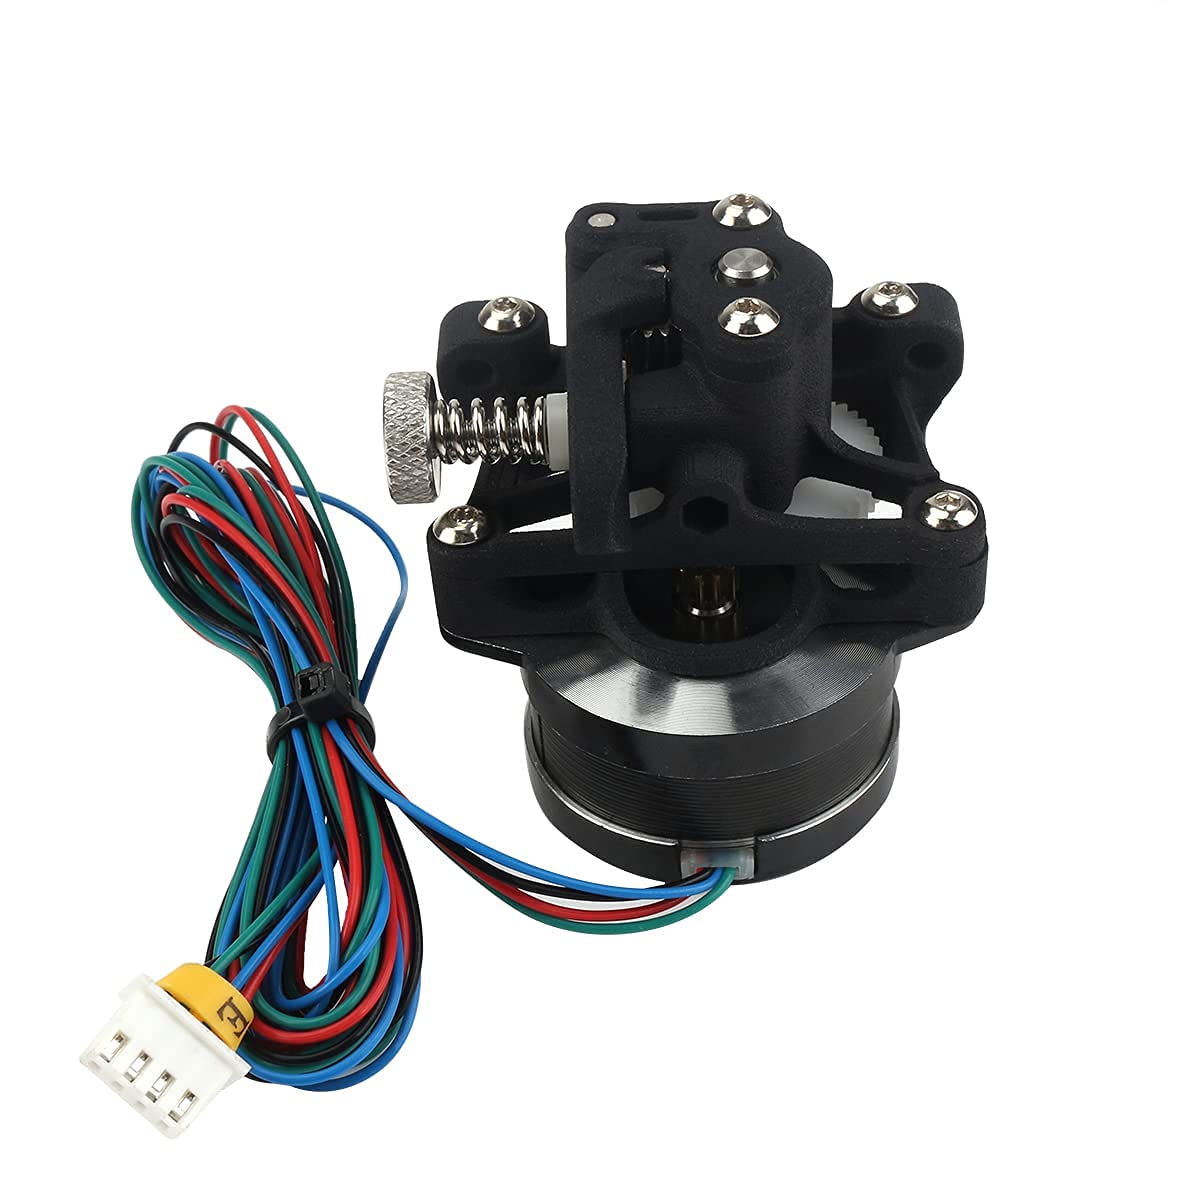 Annex Engineering Sherpa Mini Extruder - Light Weight BMG Extruder Compatible with Ender3 CR10 CR6 TEVO 3D Printers